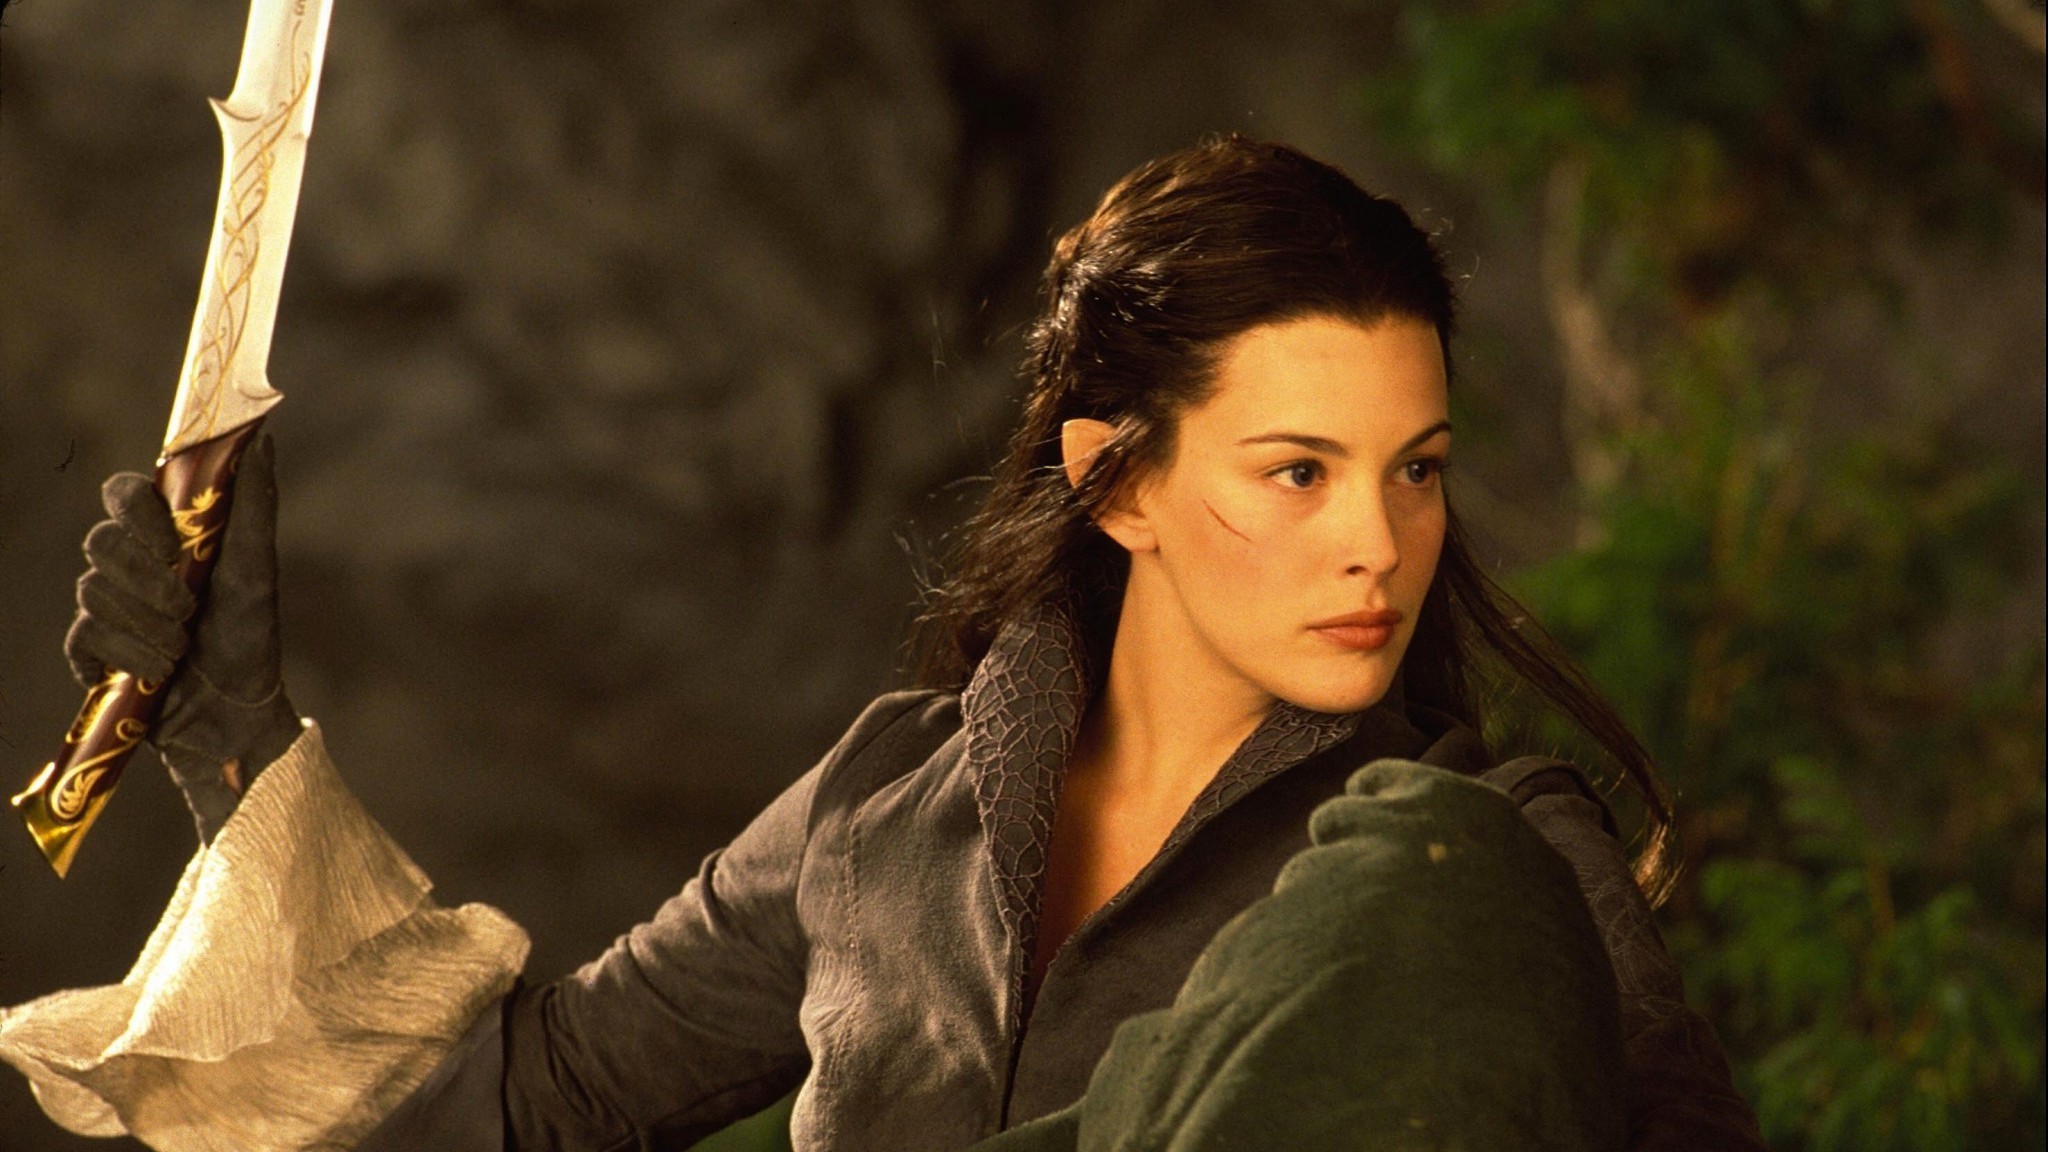 People 2048x1152 Liv Tyler The Lord of the Rings Arwen women actress elves The Lord of the Rings: The Fellowship of the Ring American women book characters Peter Jackson J. R. R. Tolkien